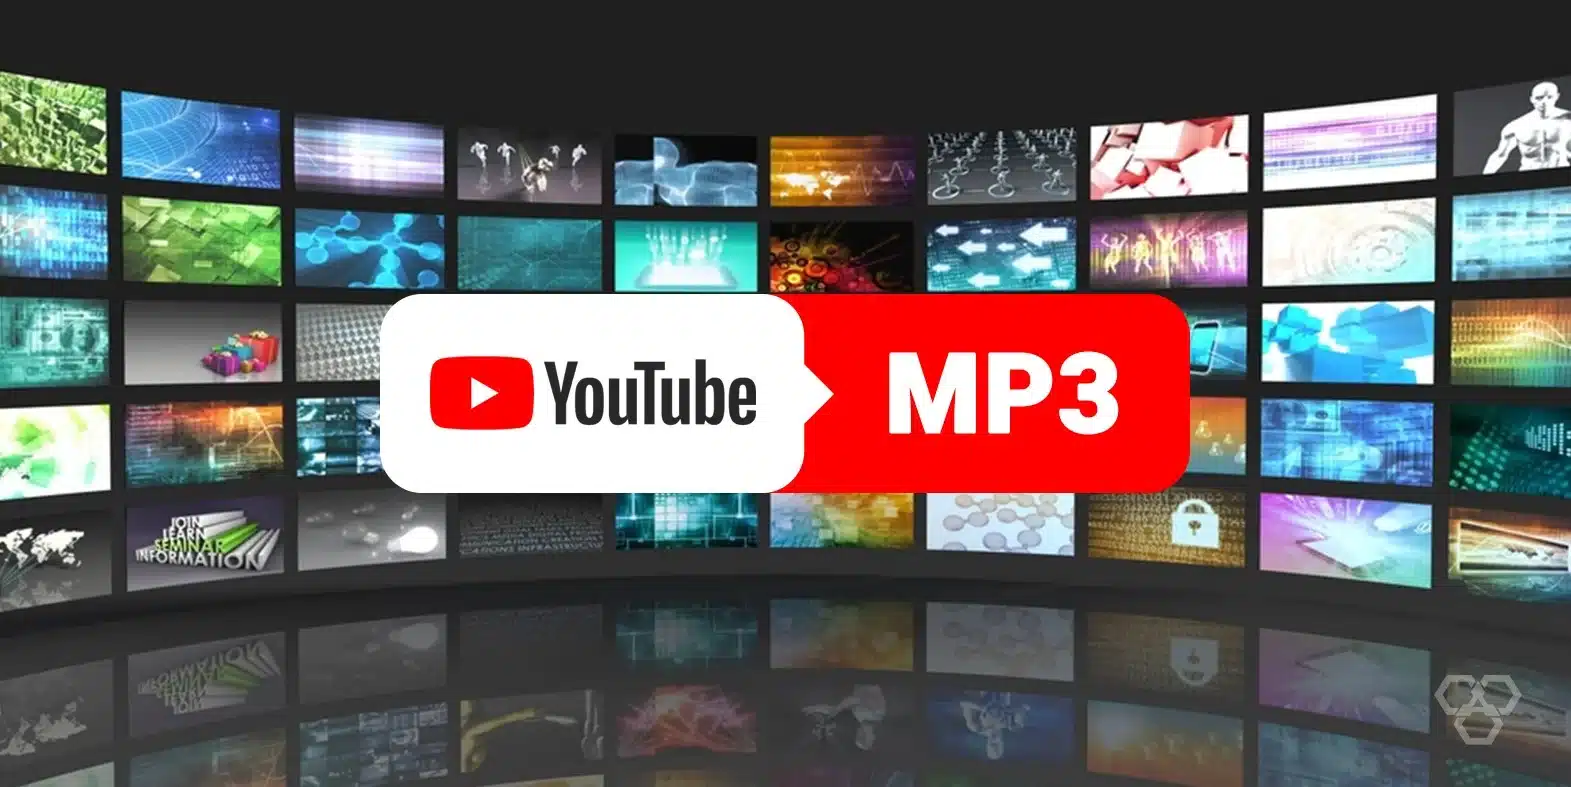 Youtube To MP3 Converters & Service is Illegal